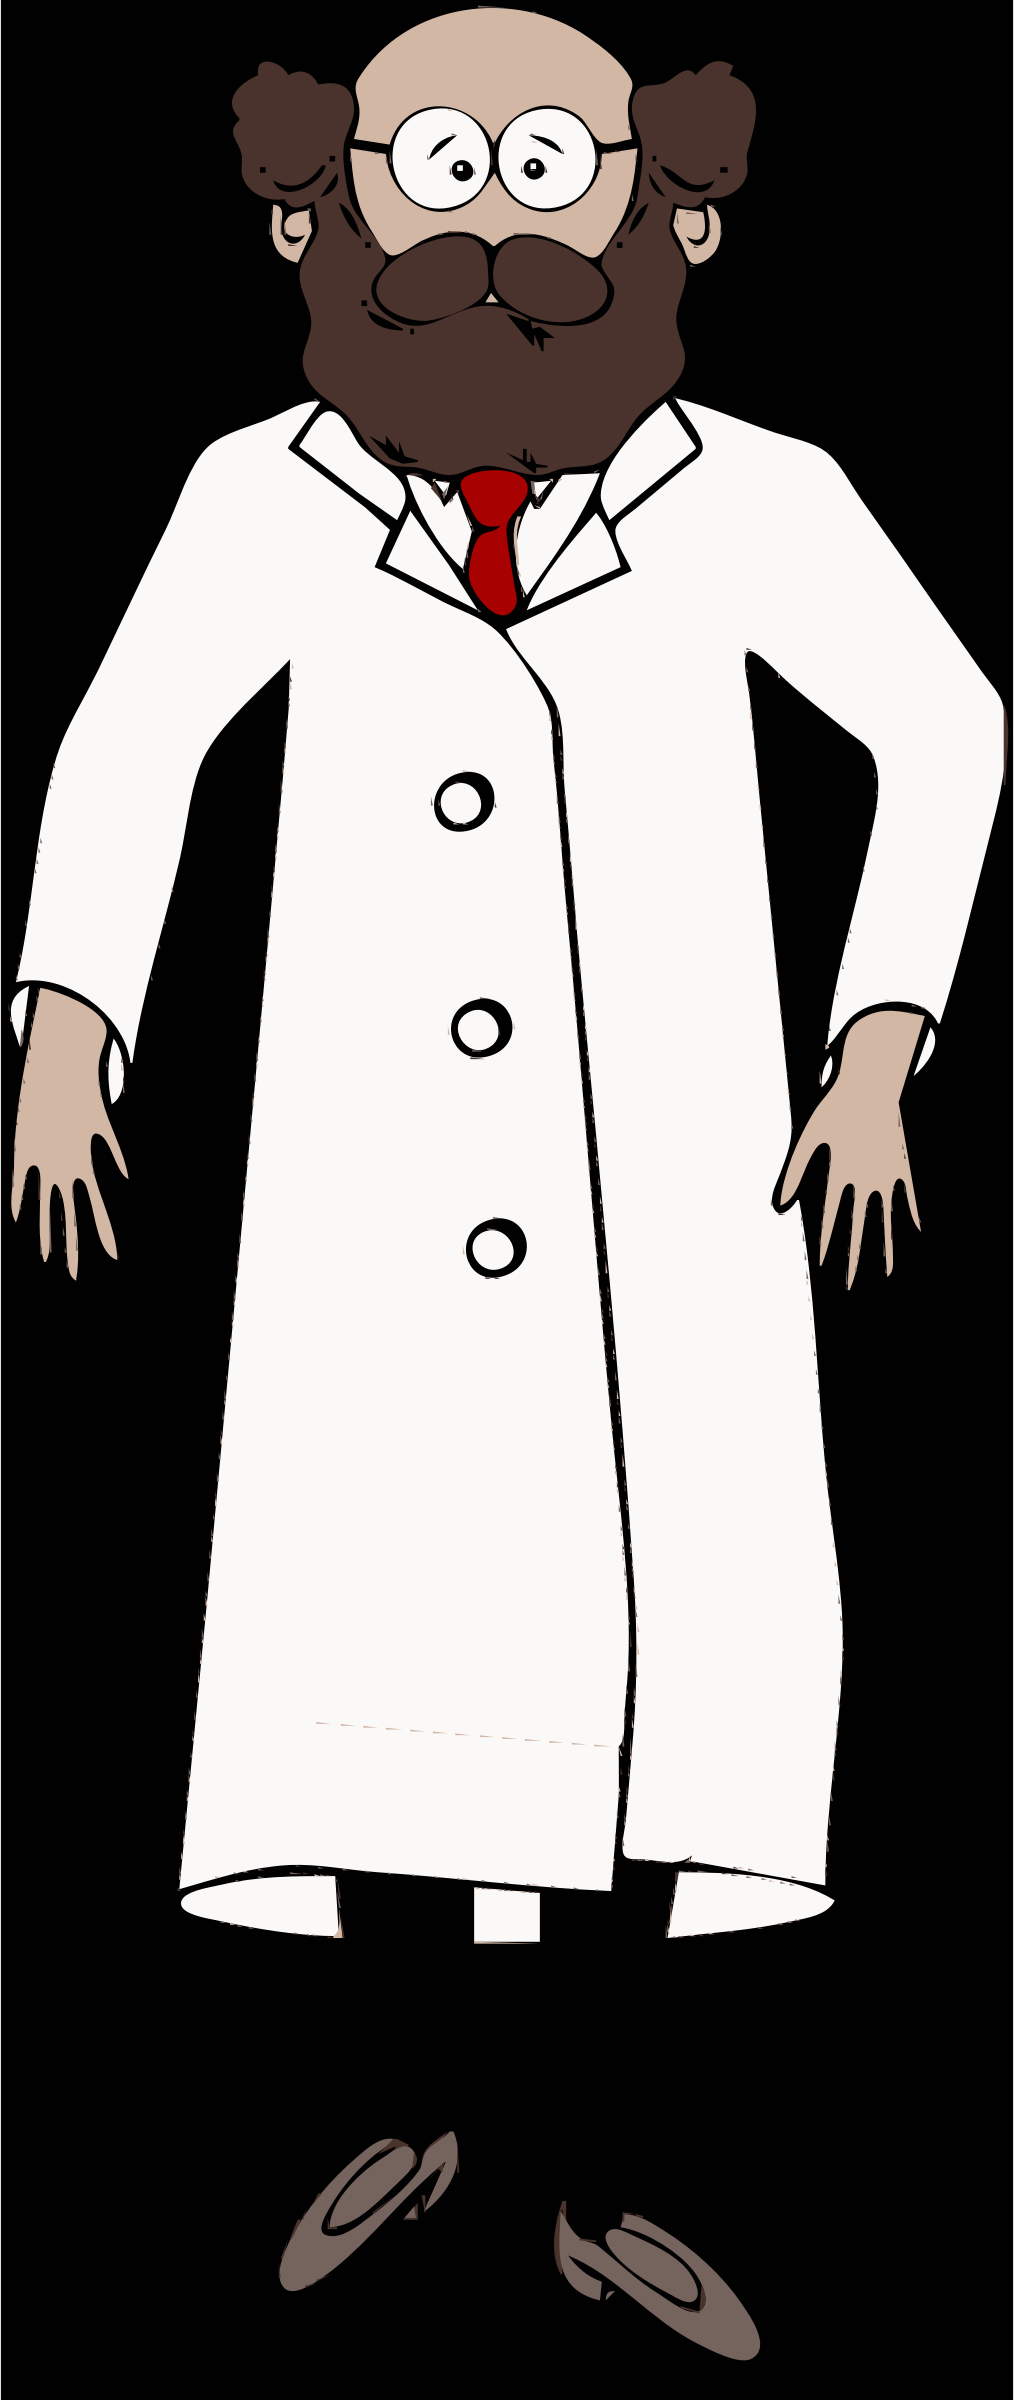 Lab Coat Worn By Scientist With Brown Beard By Barnheartowl